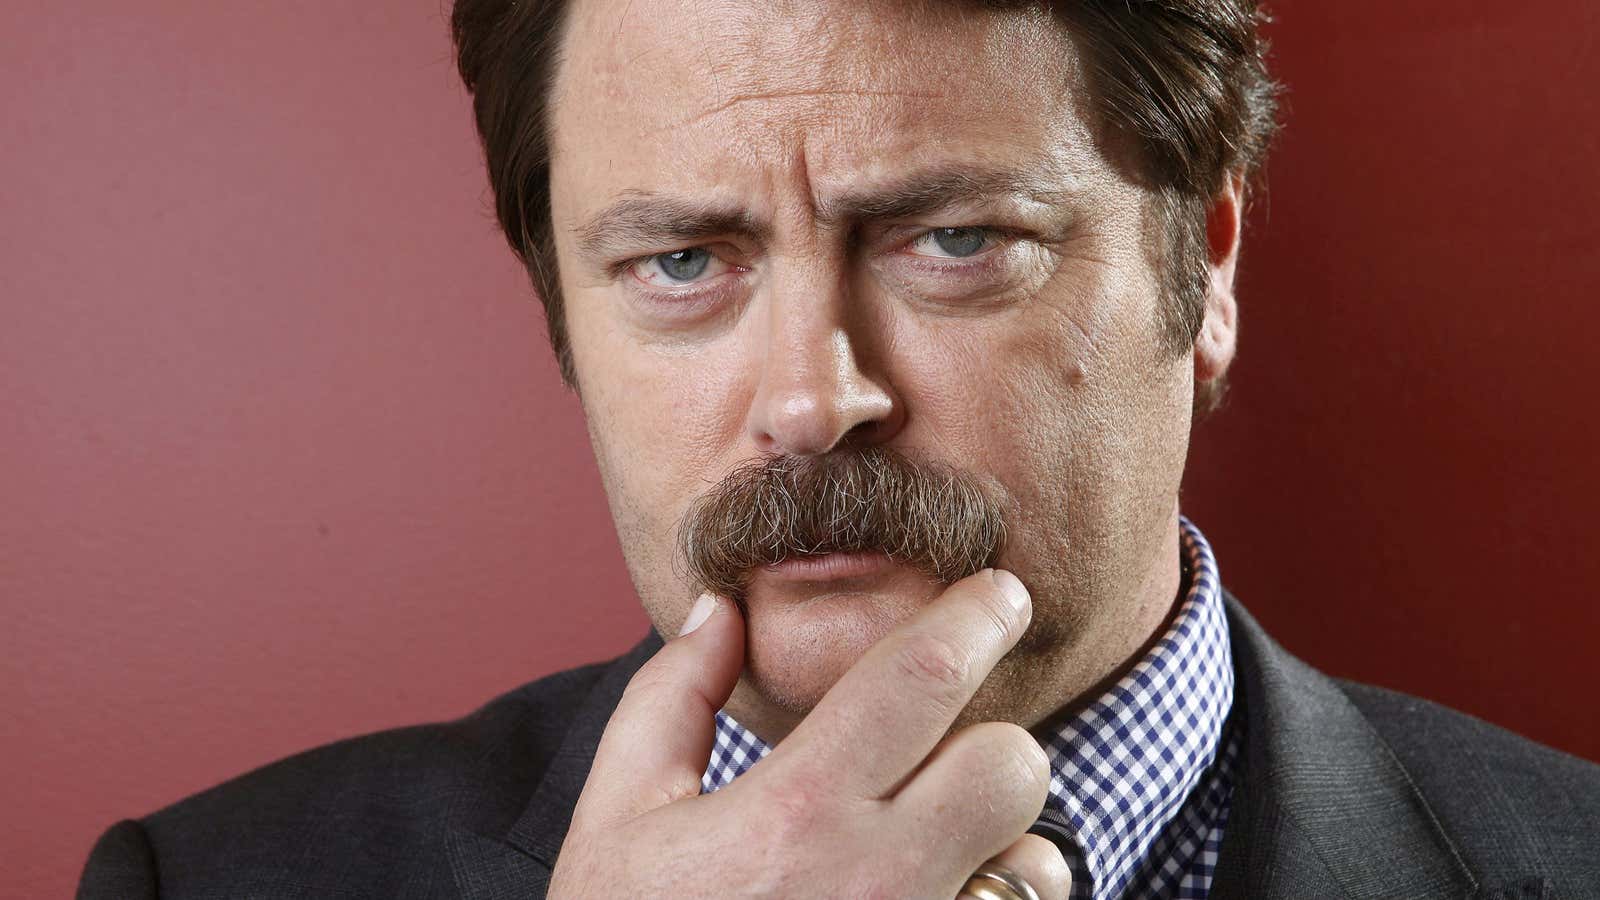 Ron Swanson approves of this initiative.